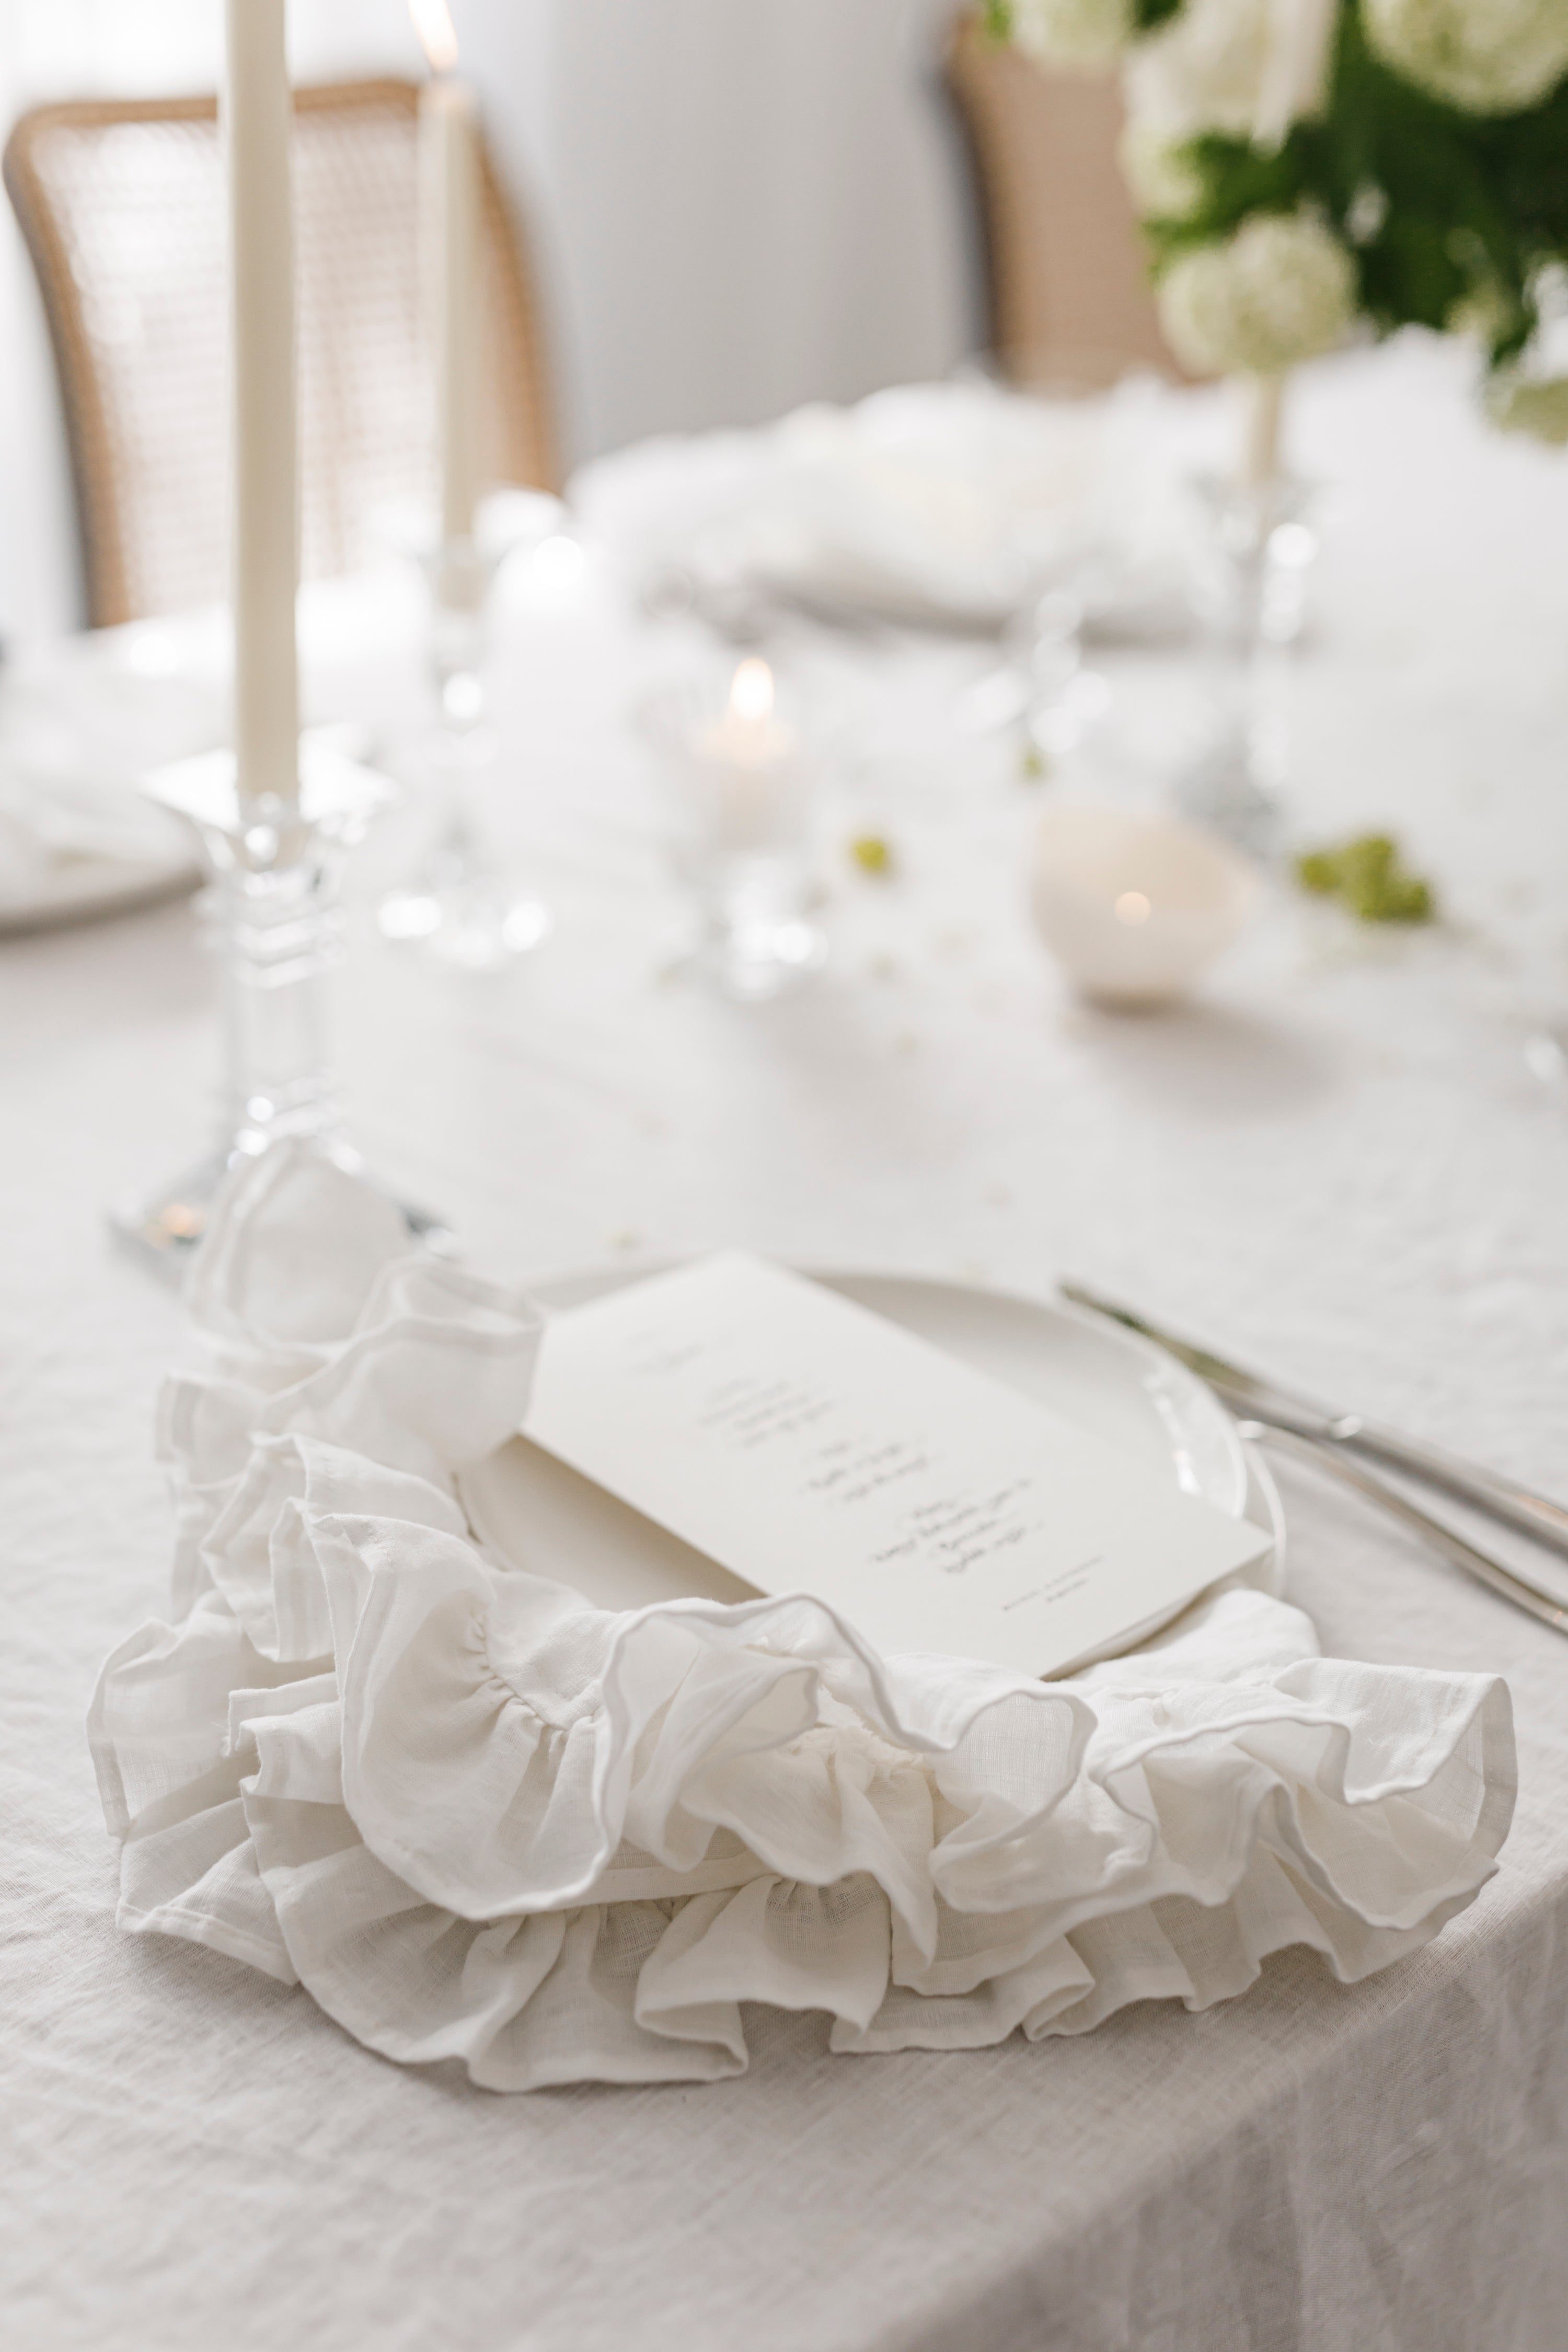 White Ruffled Napkin for Hire | For Love & Living Gold Coast Wedding & Events Hire